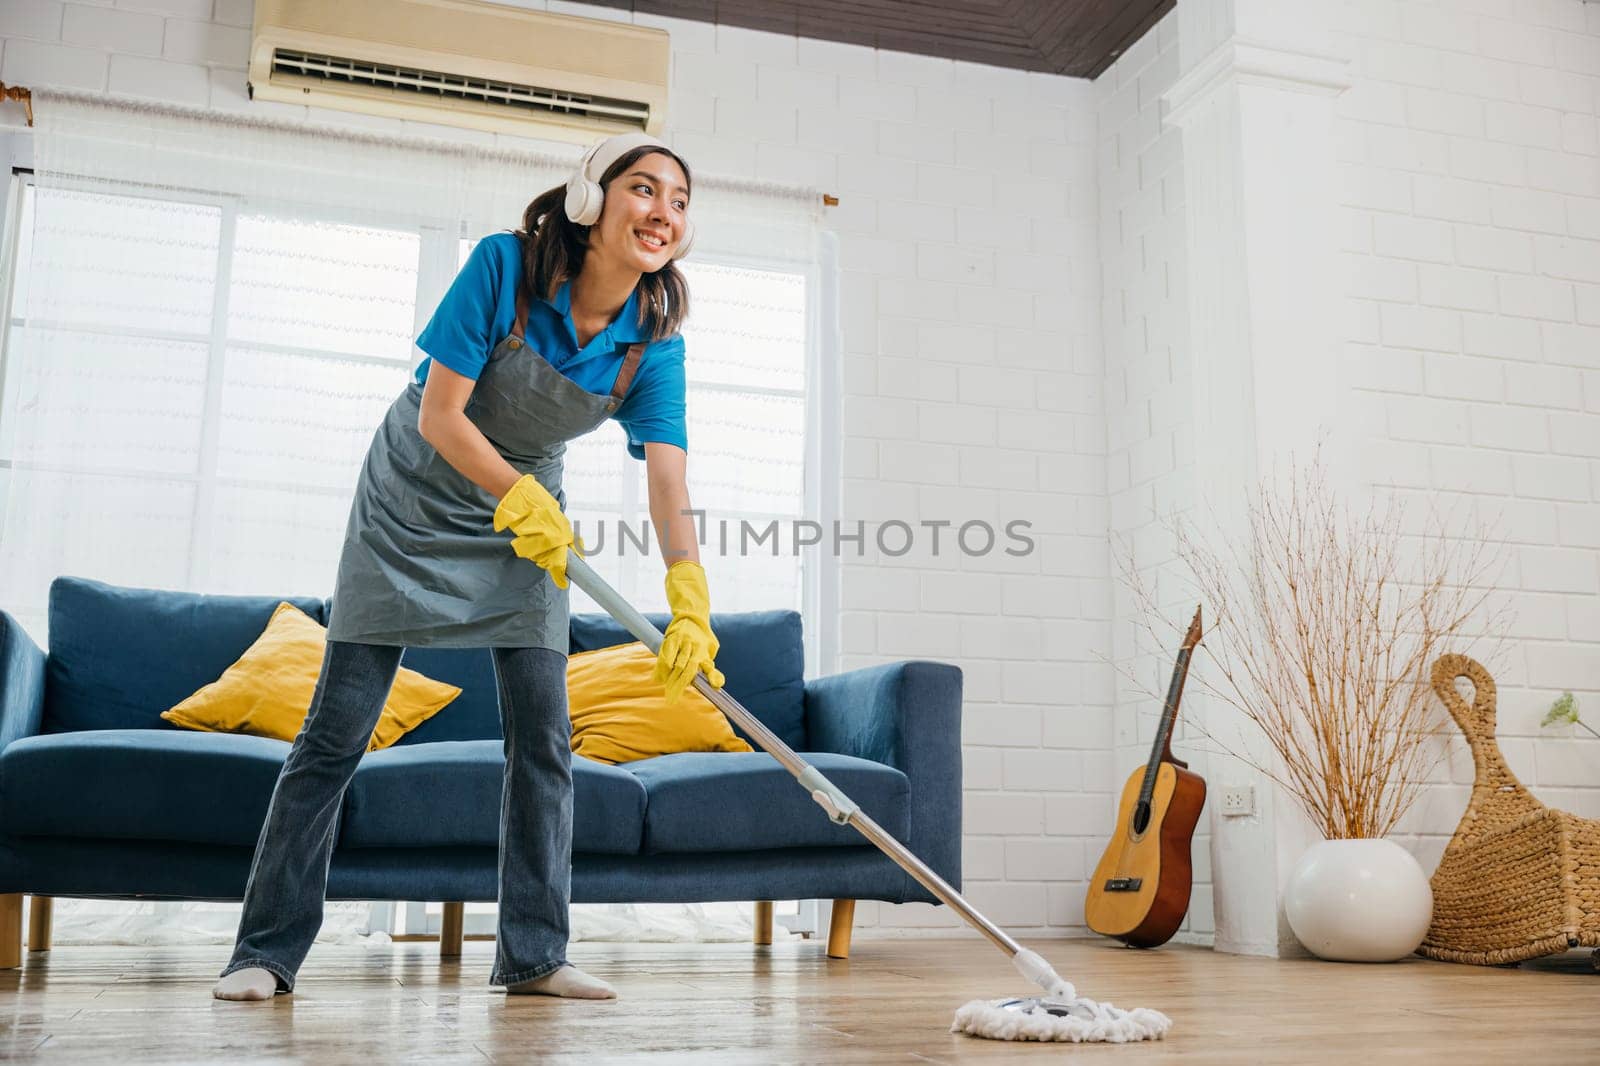 Energetic maid housework jam, Asian teen sings dances with headphones. Joyful occupation mixed with music excitement. Modern cleaning tech-enabled fun. Give me a song, Happy and Fun During Cleaning